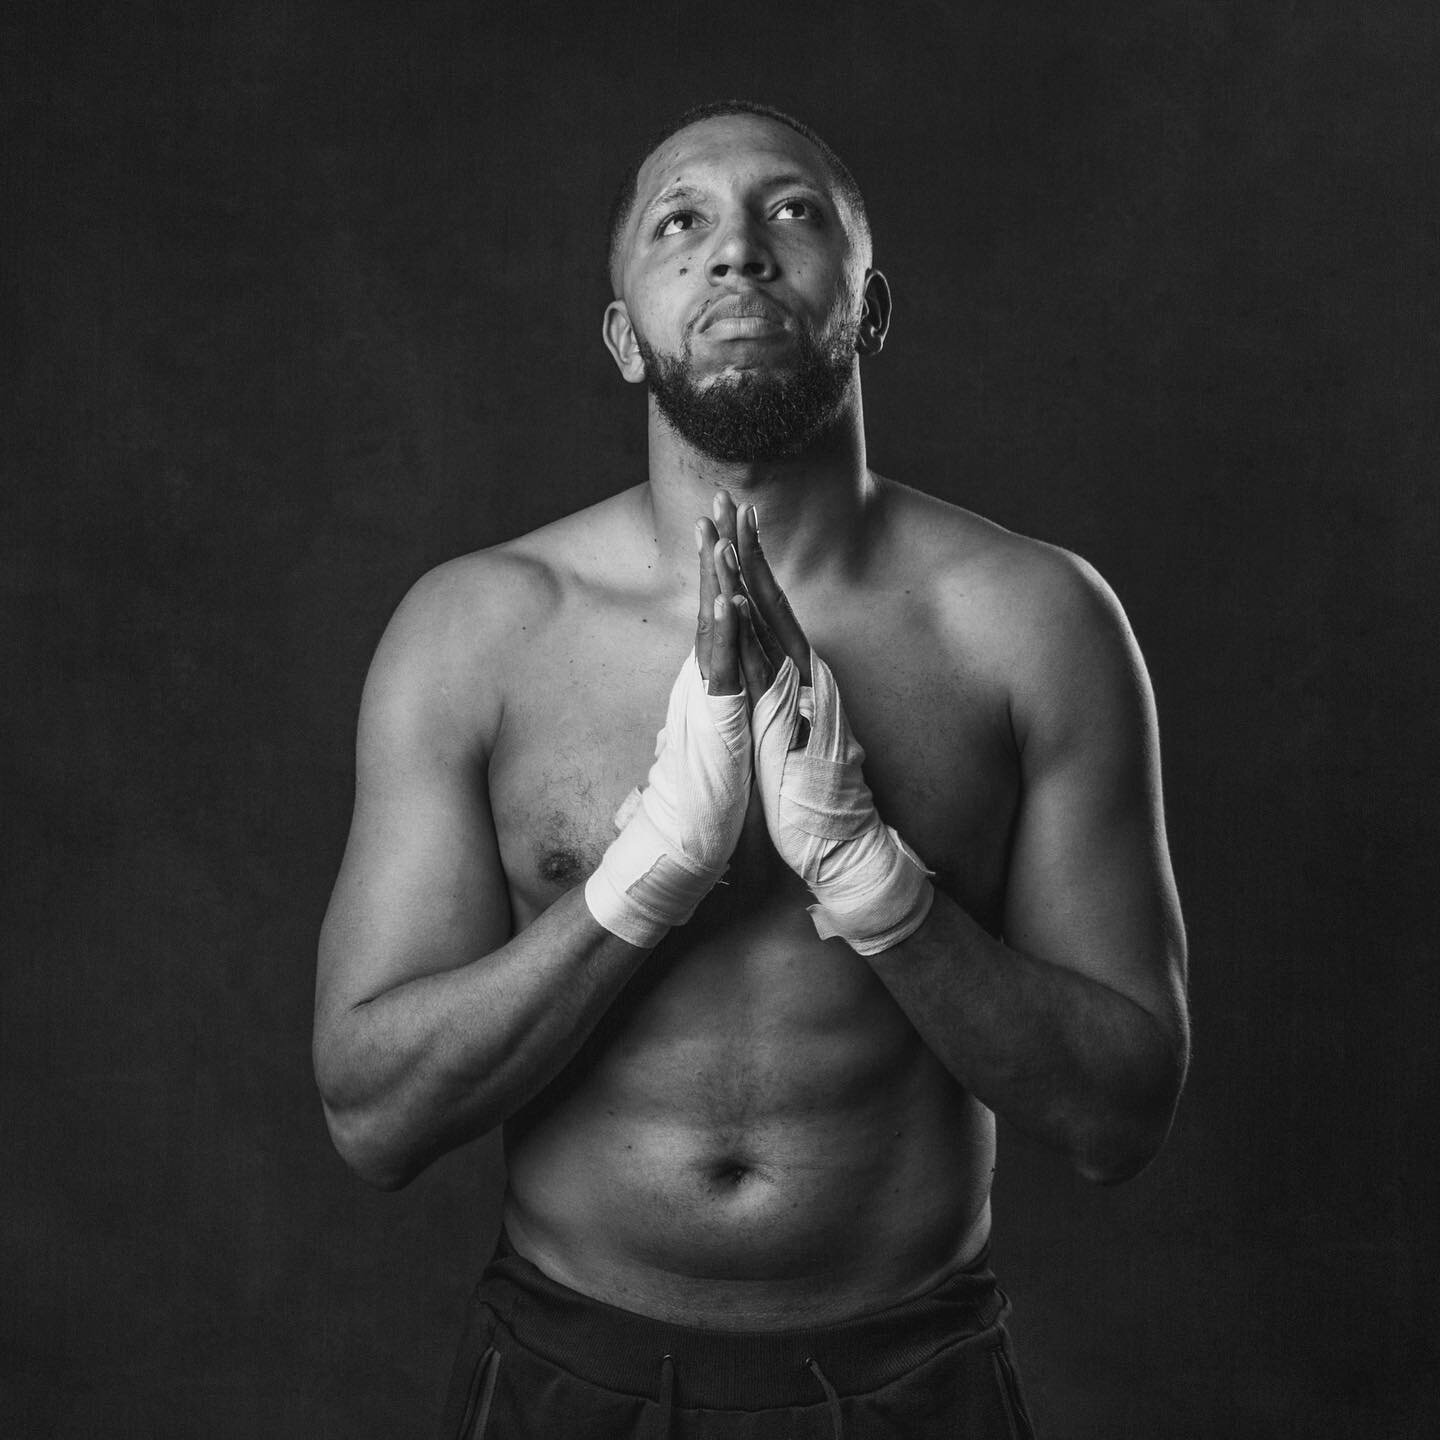 Love prayer hands! 🙏🏽 This shoot was an expression of something important. @louis_fitness247 knows what it is to fight for things, to carry deep responsibility and educate others through ethos and values. So many of us will shy away from ever speak